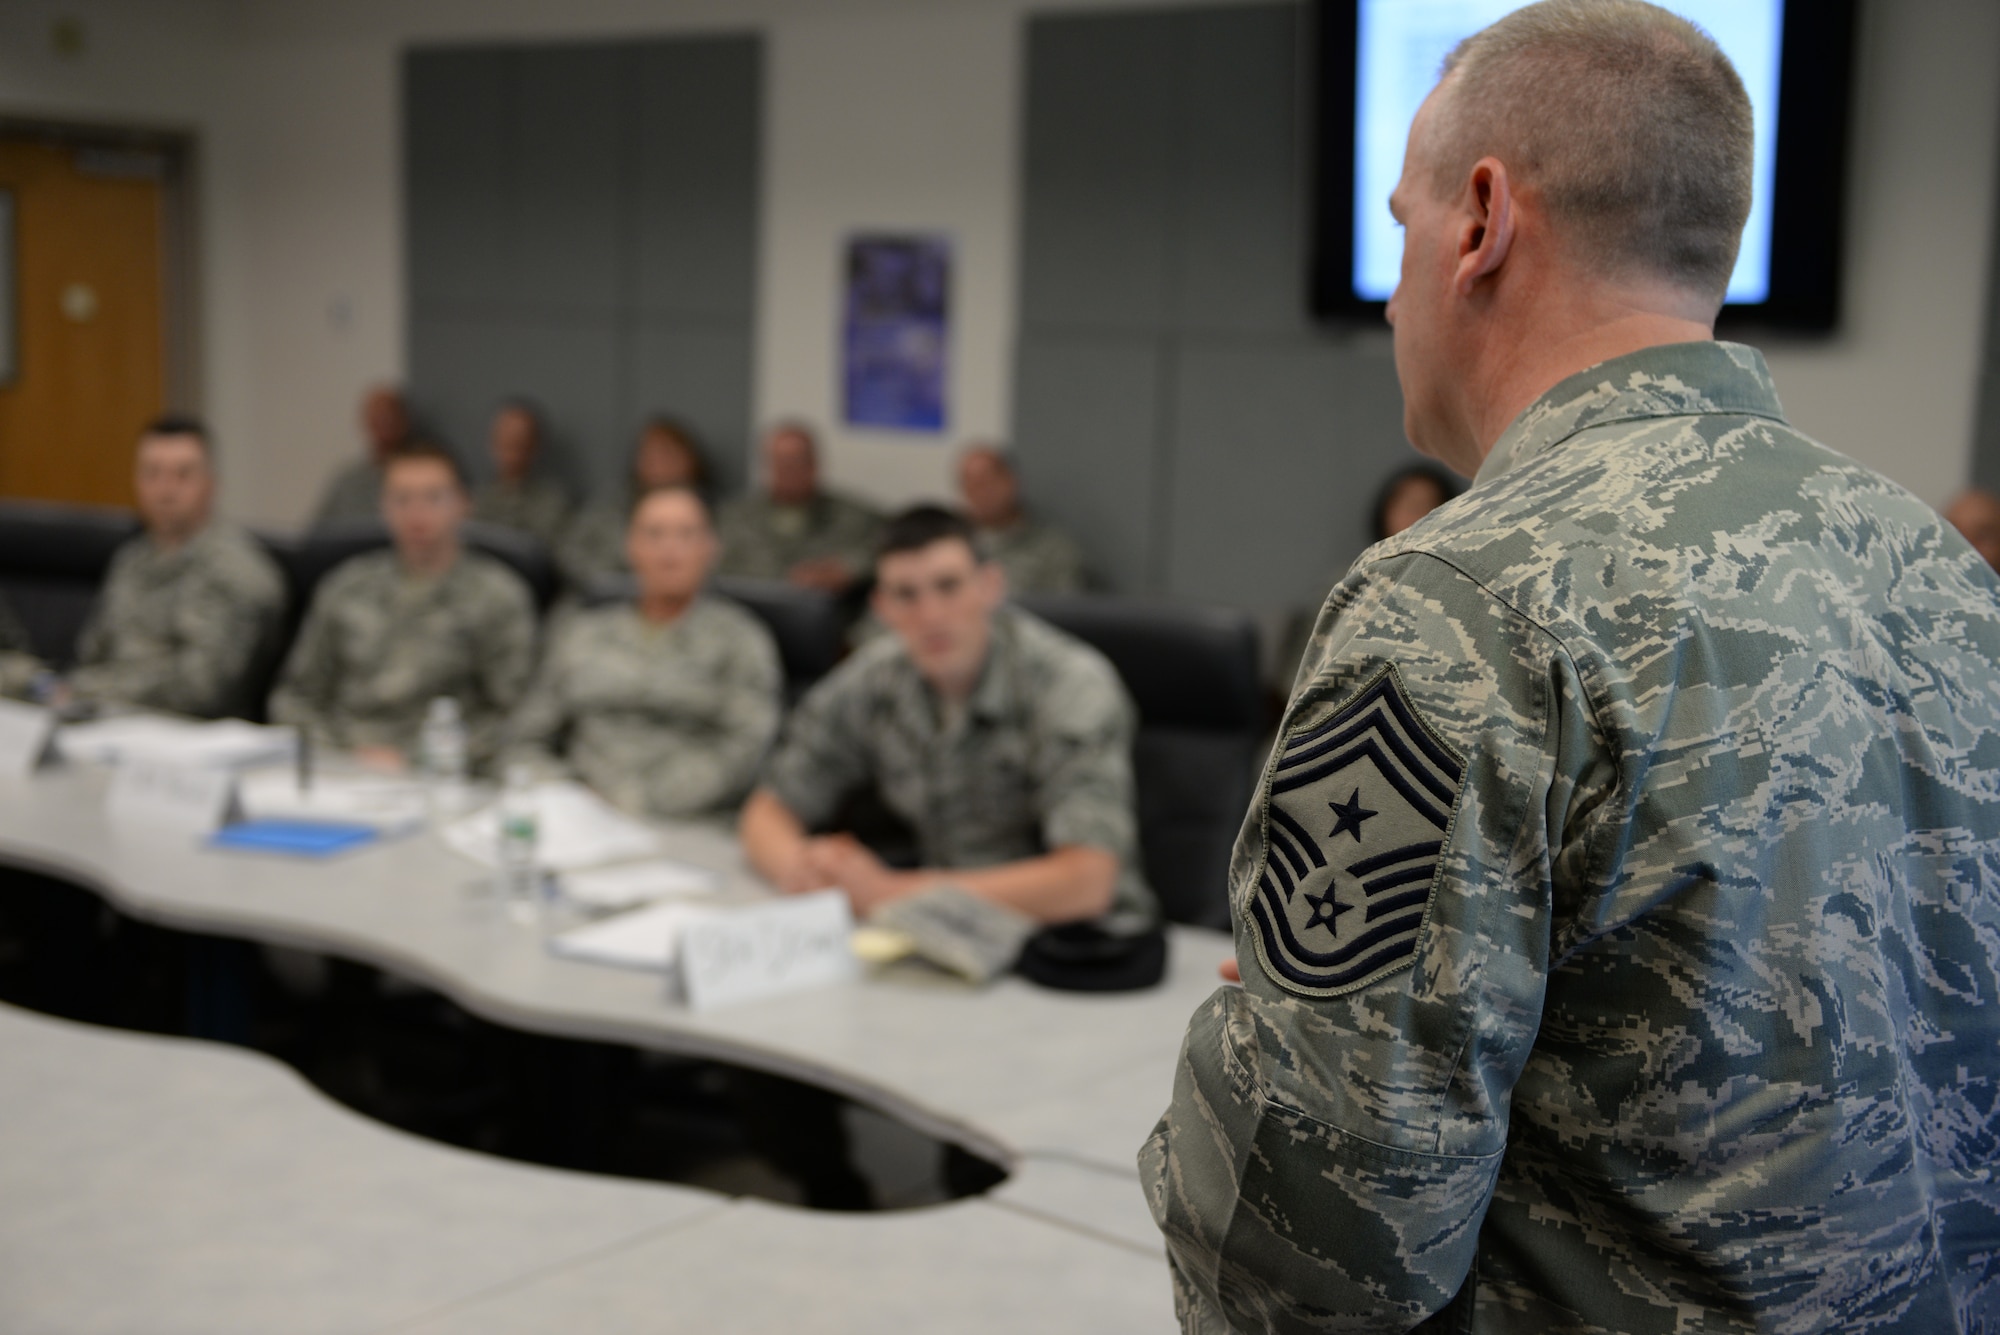 157th Air Refueling Wing Command Chief Master Sgt. Jamie Lawrence welcomes 10 senior airman to the first-ever Satellite Airman Leadership School class at Pease Air National Guard Base, N.H., May 9.  (U.S. Air National Guard photo by Staff Sgt. Curtis J. Lenz)